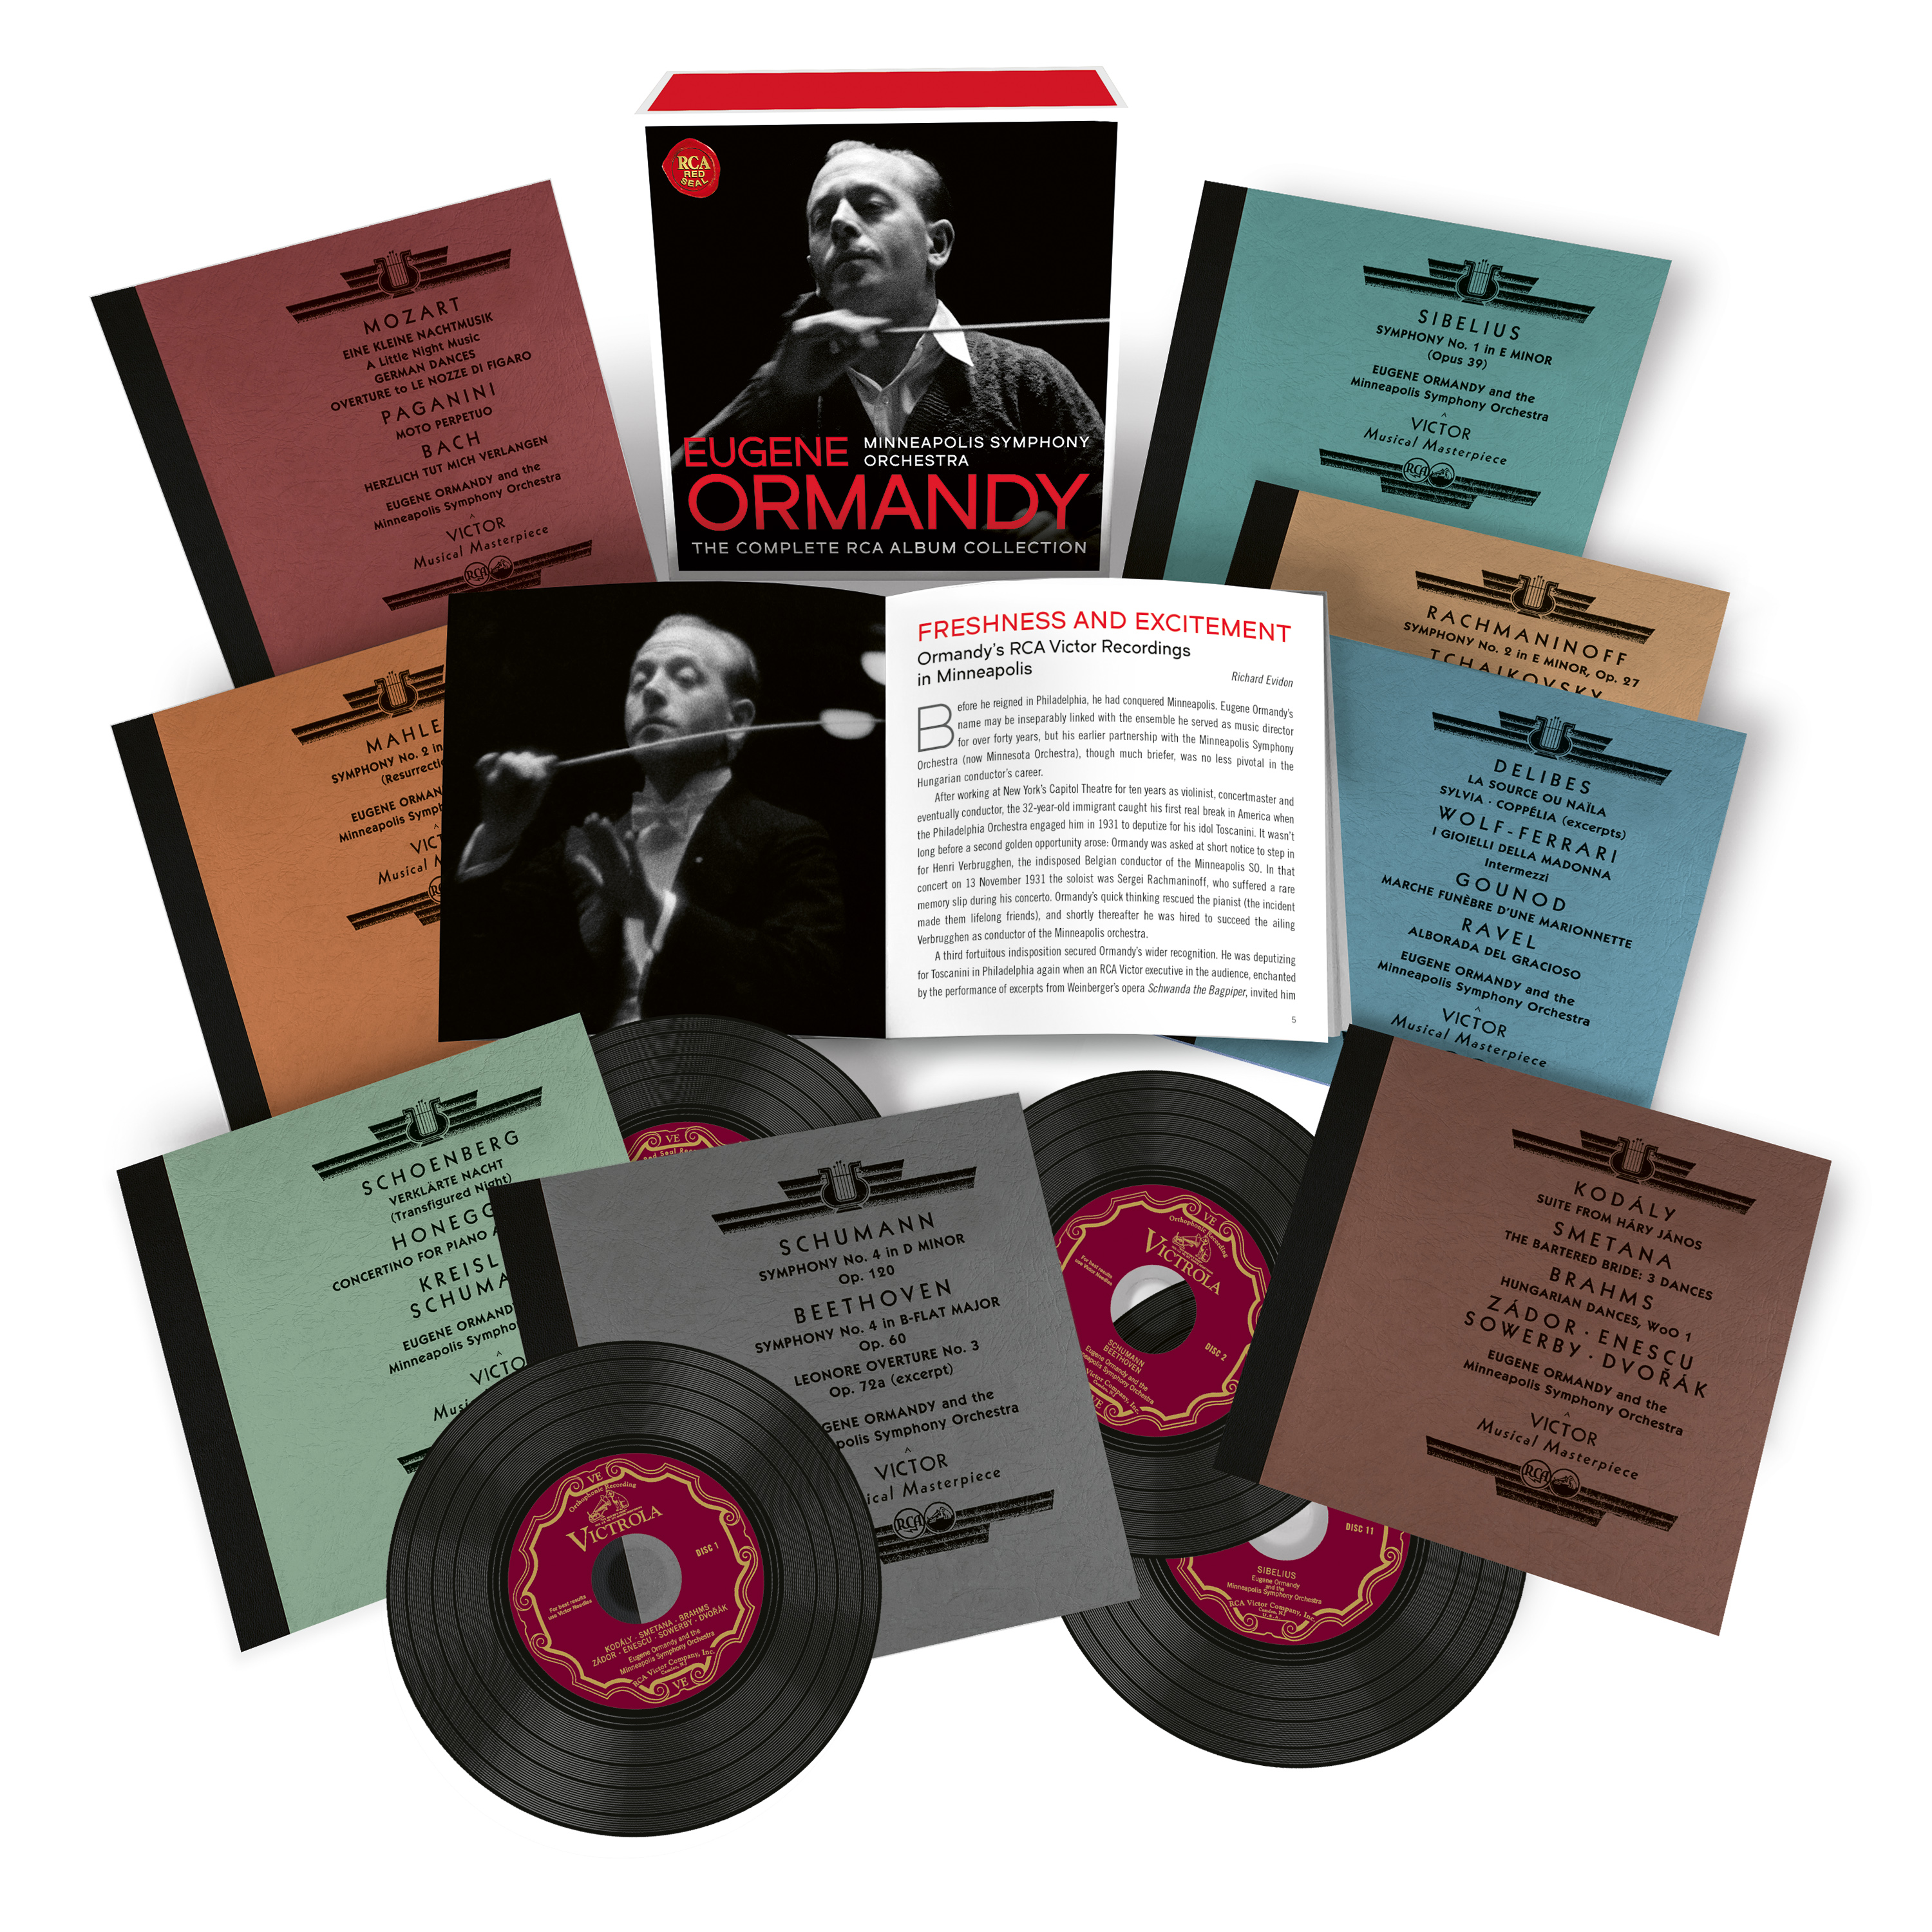 Eugene Ormandy - Eugene Ormandy Conducts the Minneapolis Symphony Orchestra - The Complete RCA Album Collection